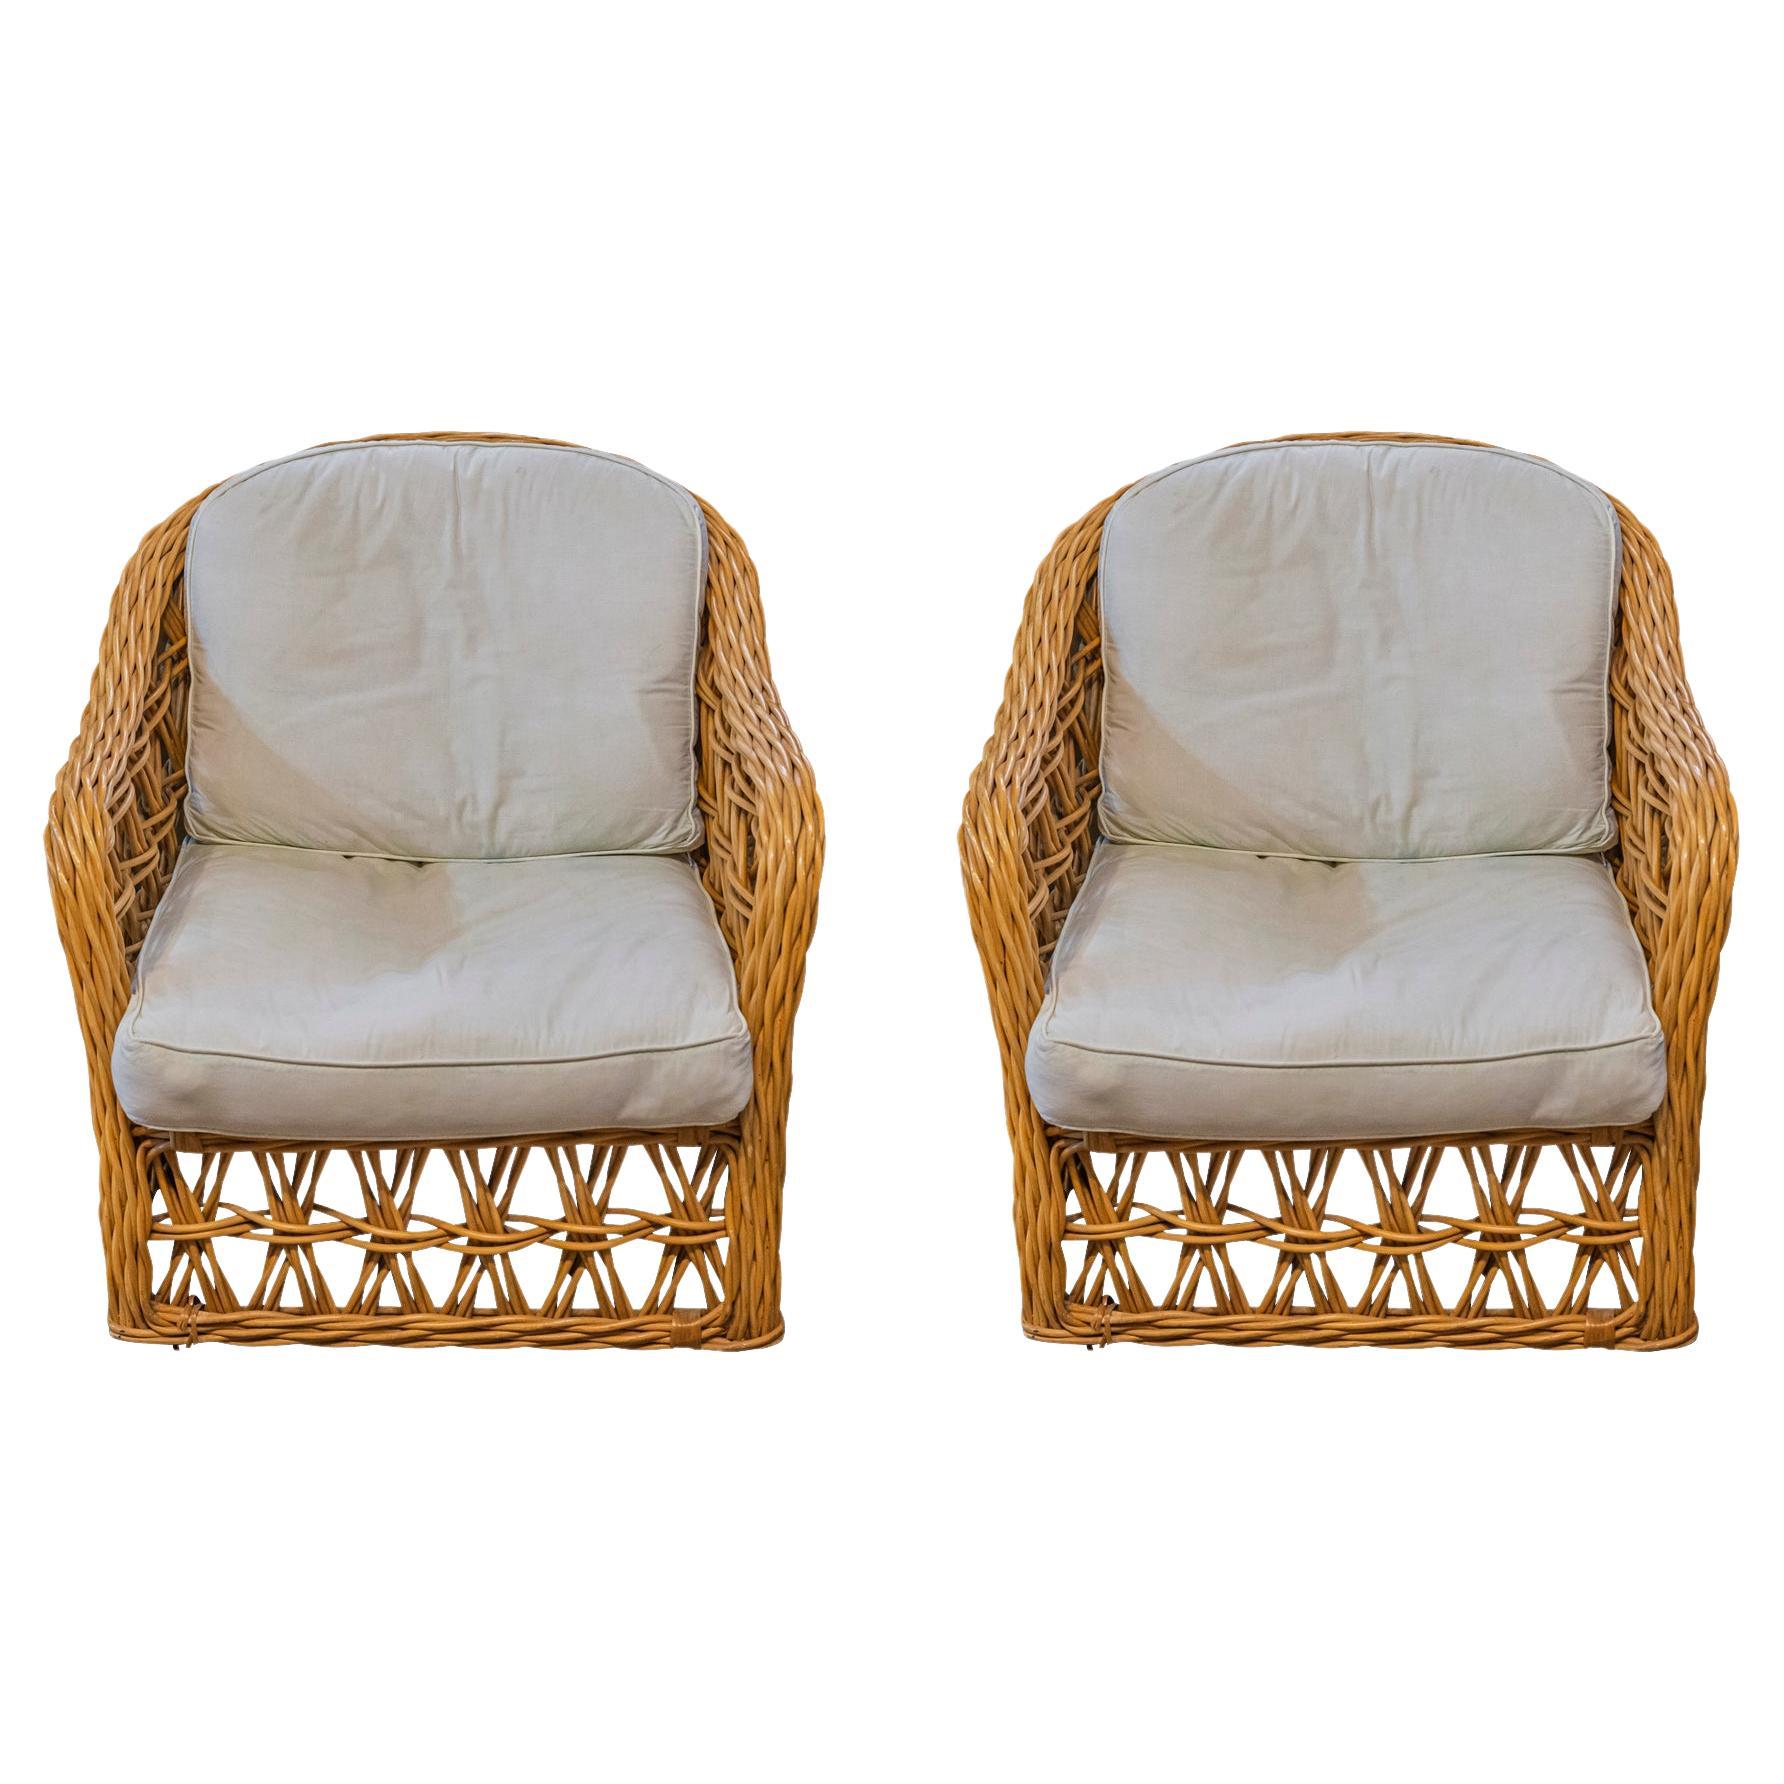 Ralph Lauren, Pair of armchairs, France, circa 1990 For Sale